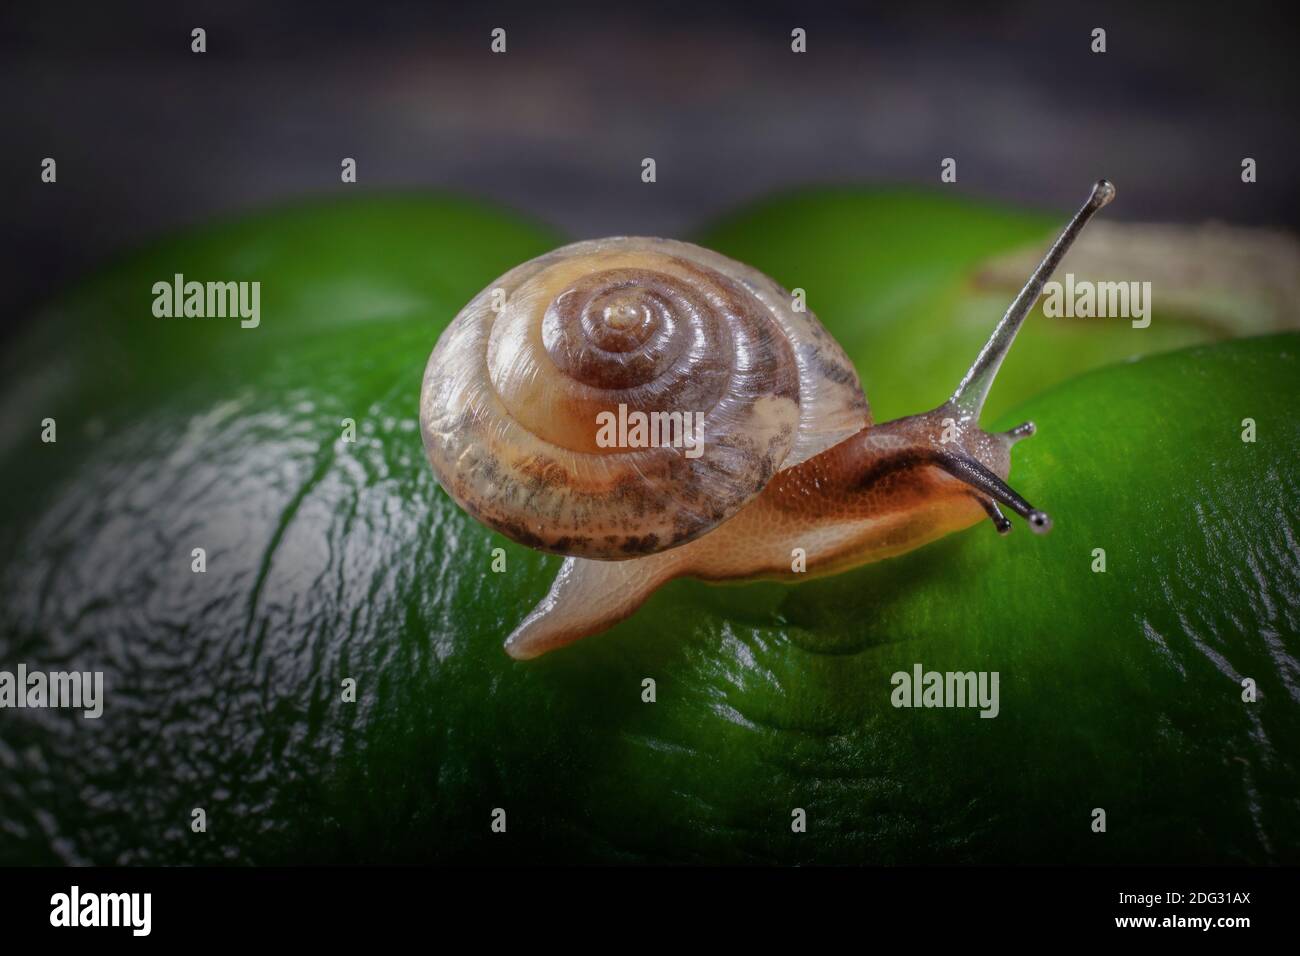 Little Snail on the Curves of Wrinkled surface of Big Green Pepper, Snail is Really Small About 0,4 inch  is Diameter of  his House. Stock Photo